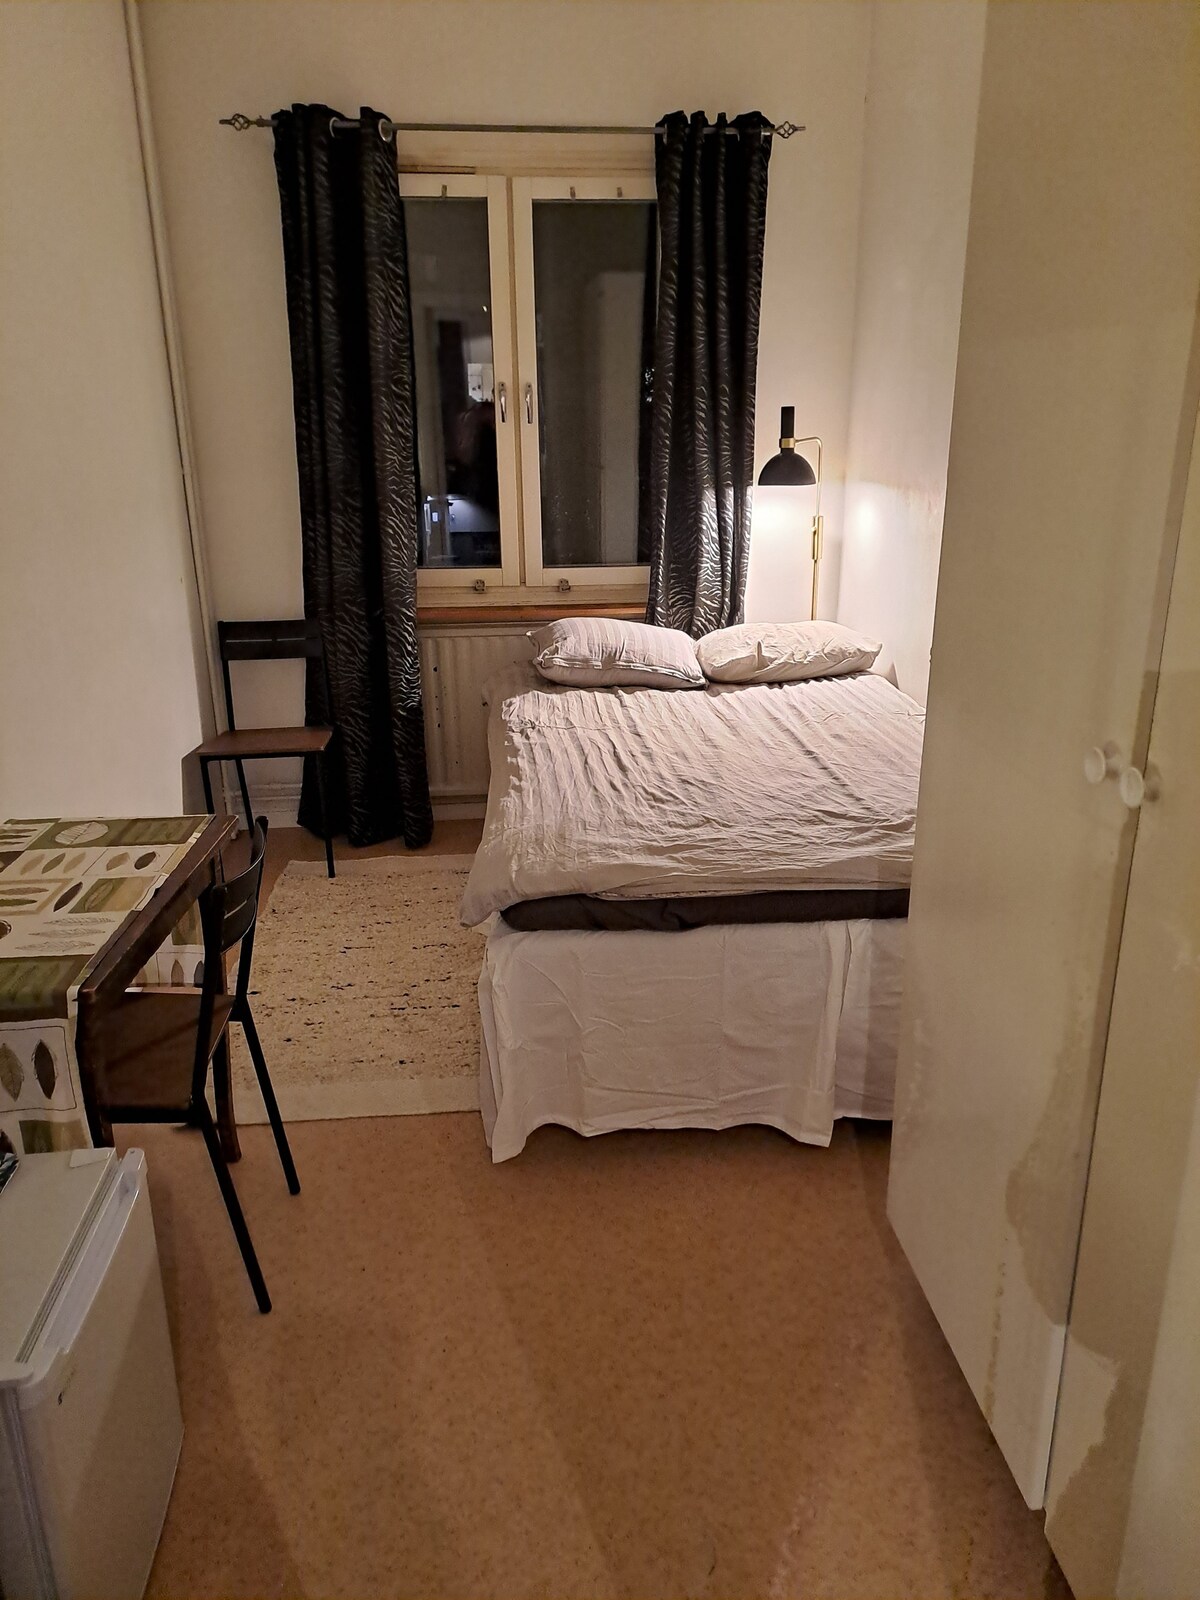 Cosy room in quiet area, close to Central station.